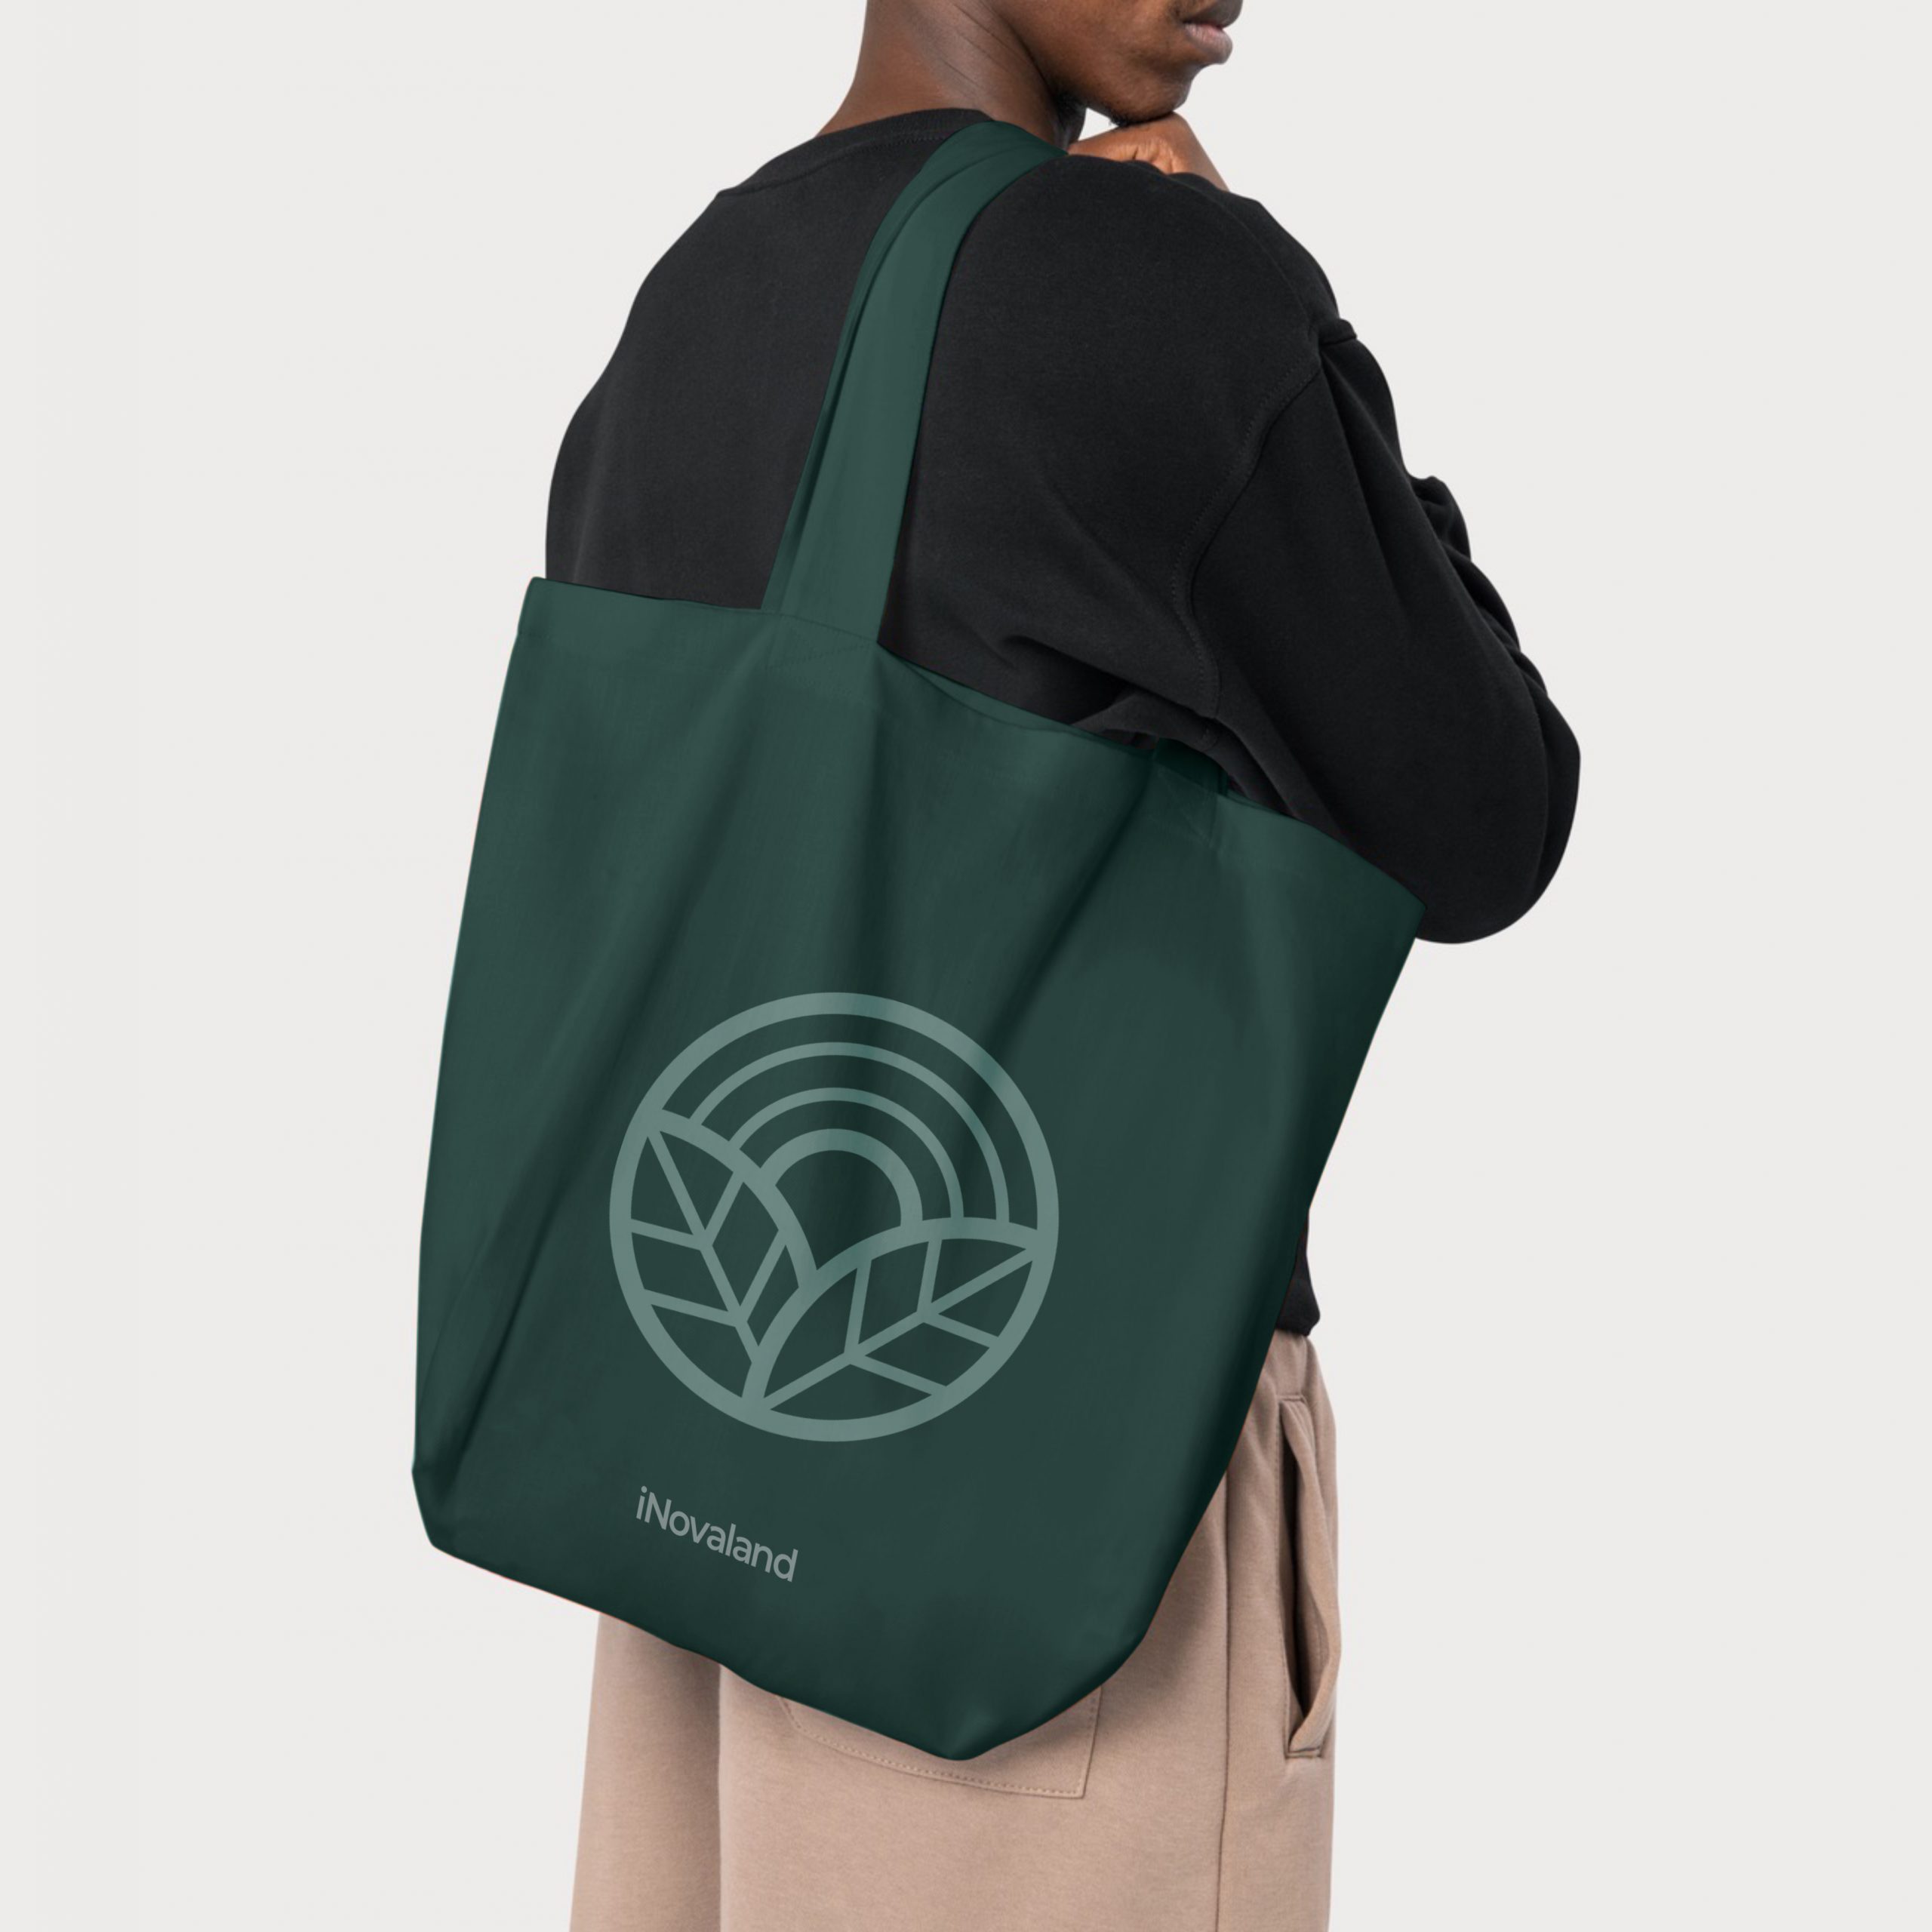 Man carrying a green tote bag with the iNovaland logo printed on the side of it.